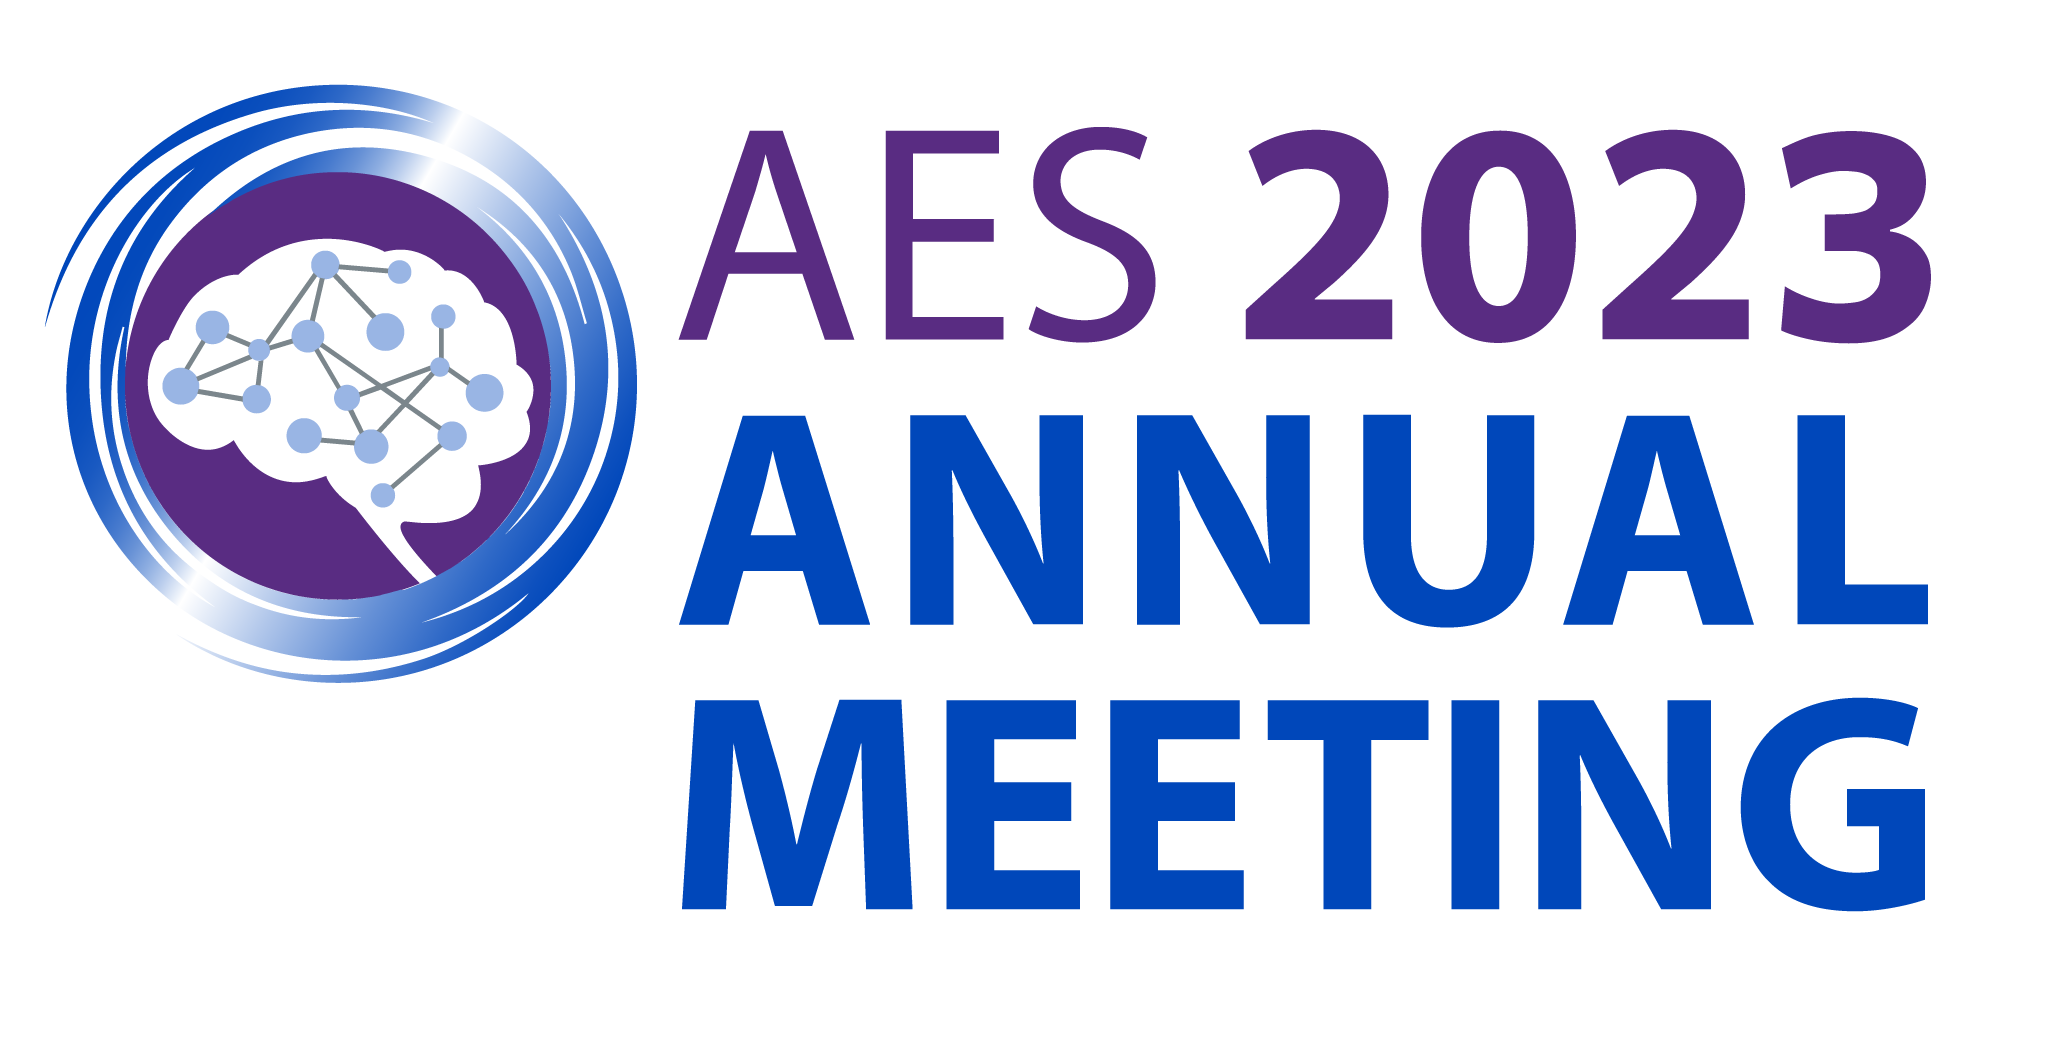 AES 2023 Annual Meeting